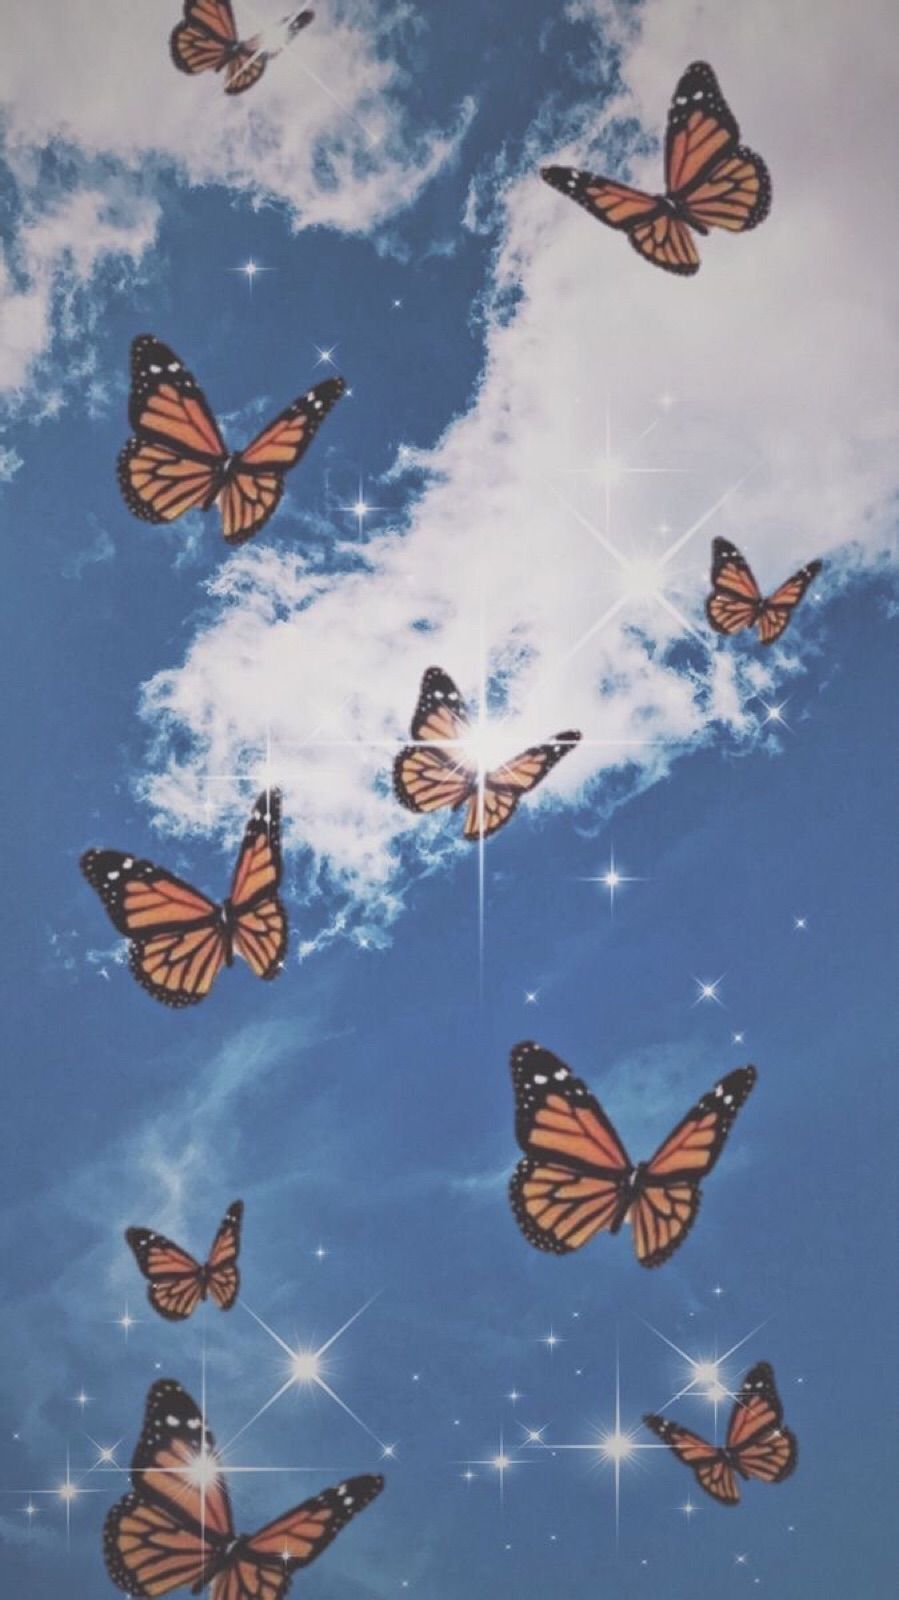 Aesthetic butterfly wallpaper for phone background - Ariana Grande, bling, butterfly, sky